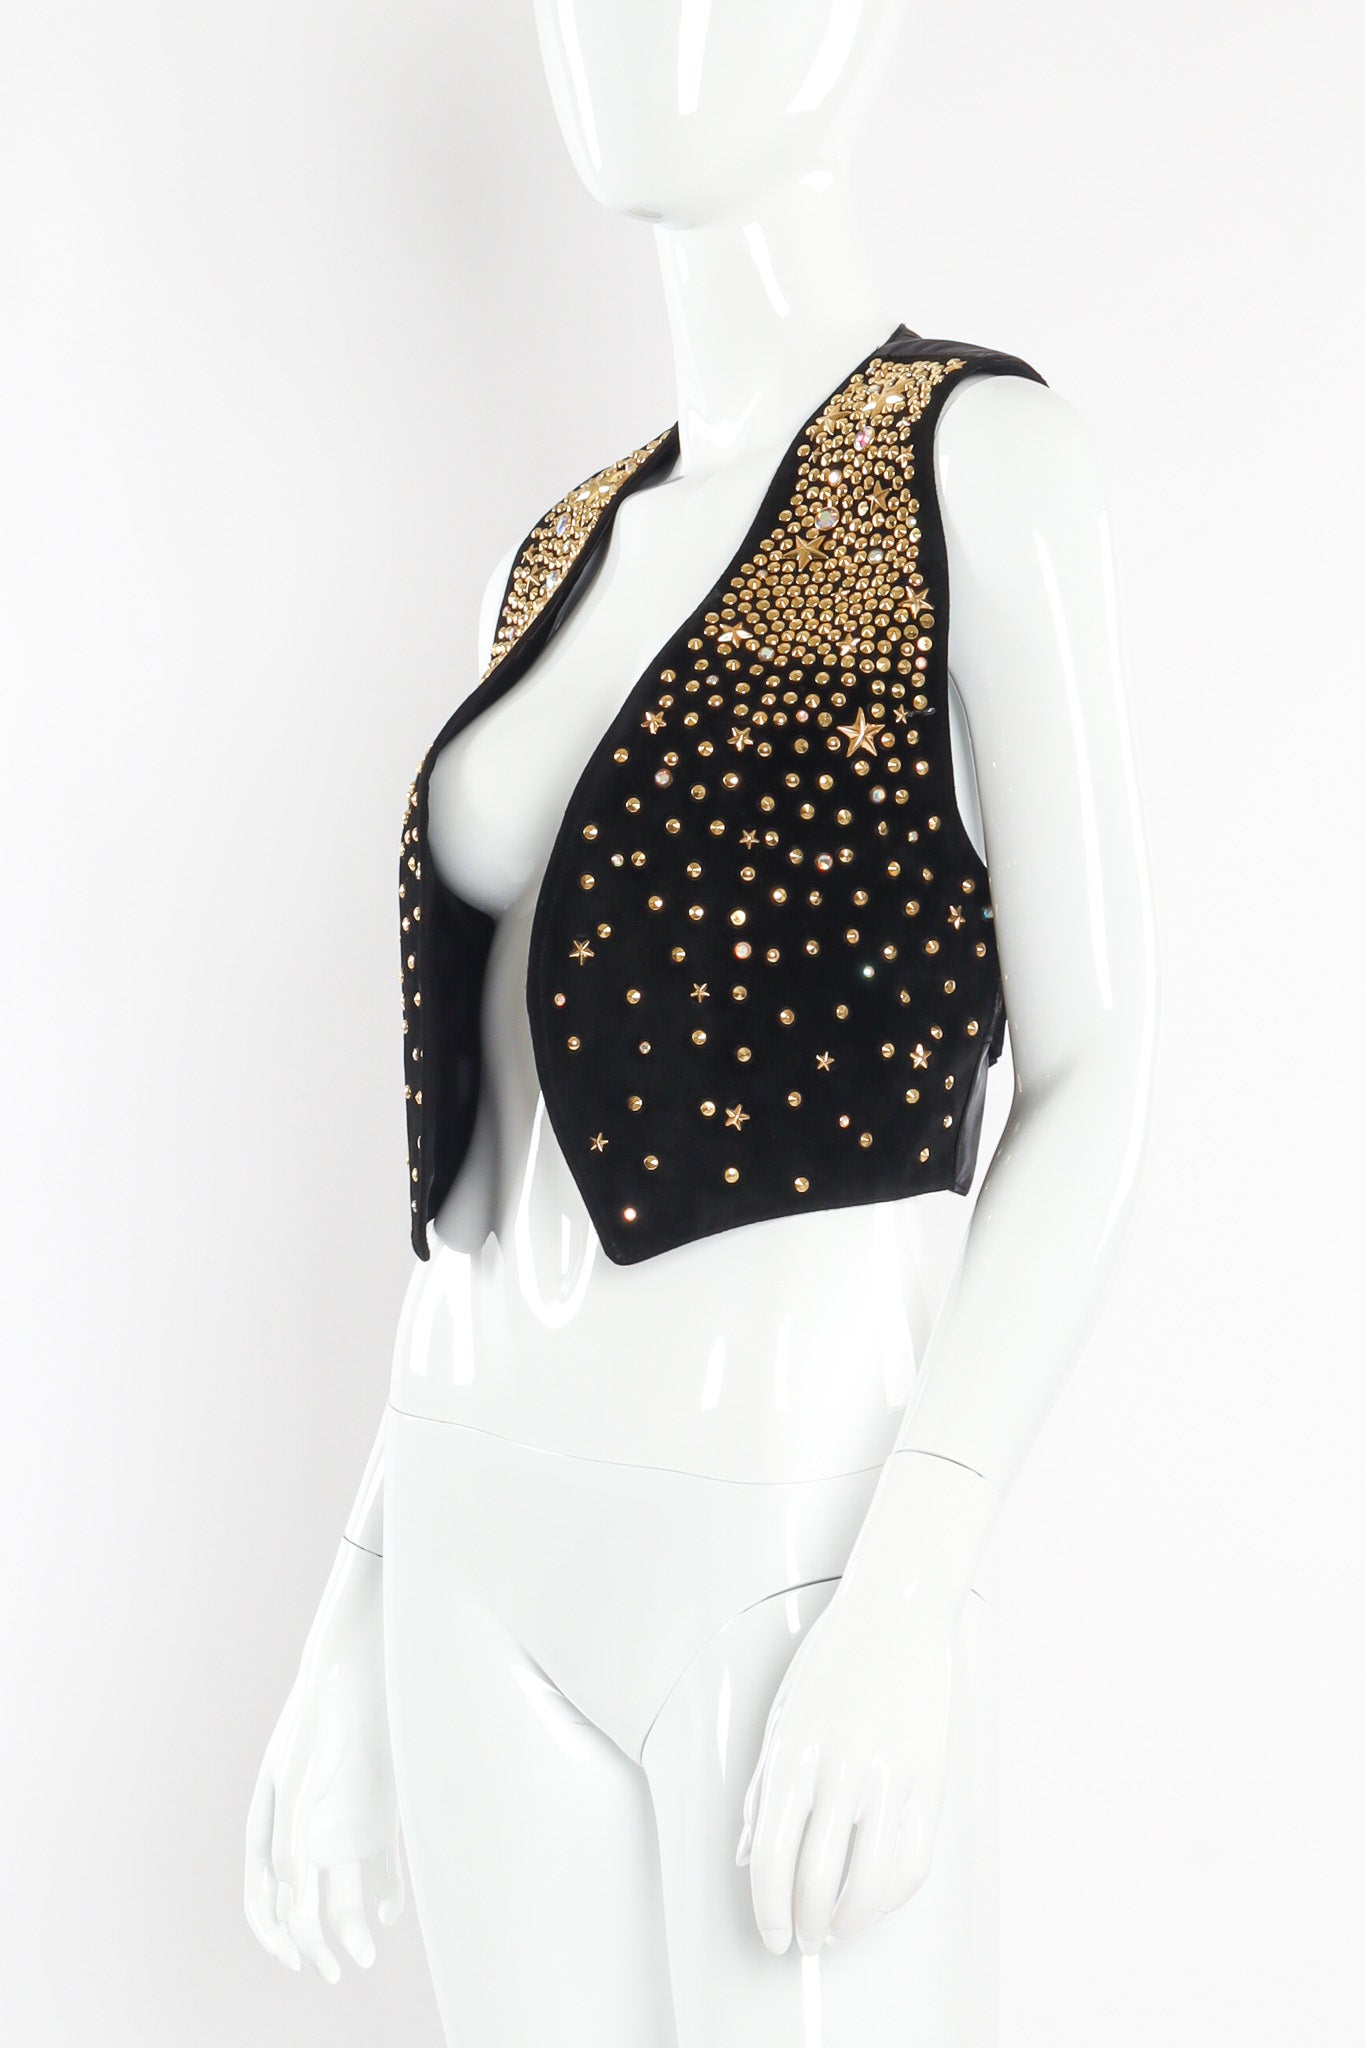 Leather vest with eclectic star and opalescent studs by K. Baumann three quarter view tied @recessla